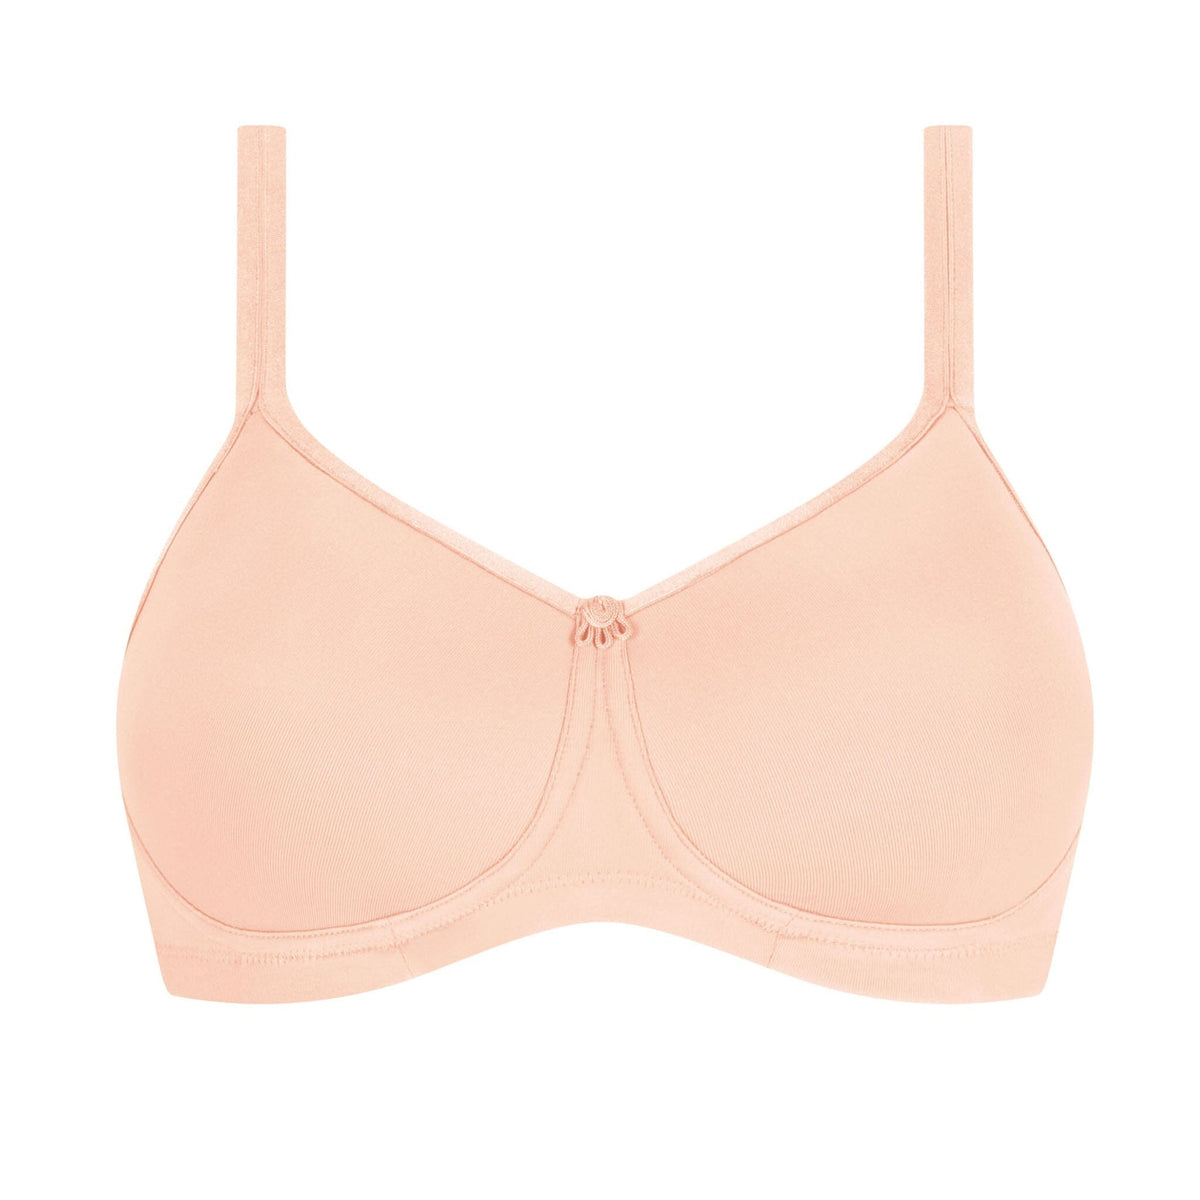 Fit Fully Yours Rosa Sweetheart T-Shirt Bra in Caffe FINAL SALE (50% Off) -  Busted Bra Shop